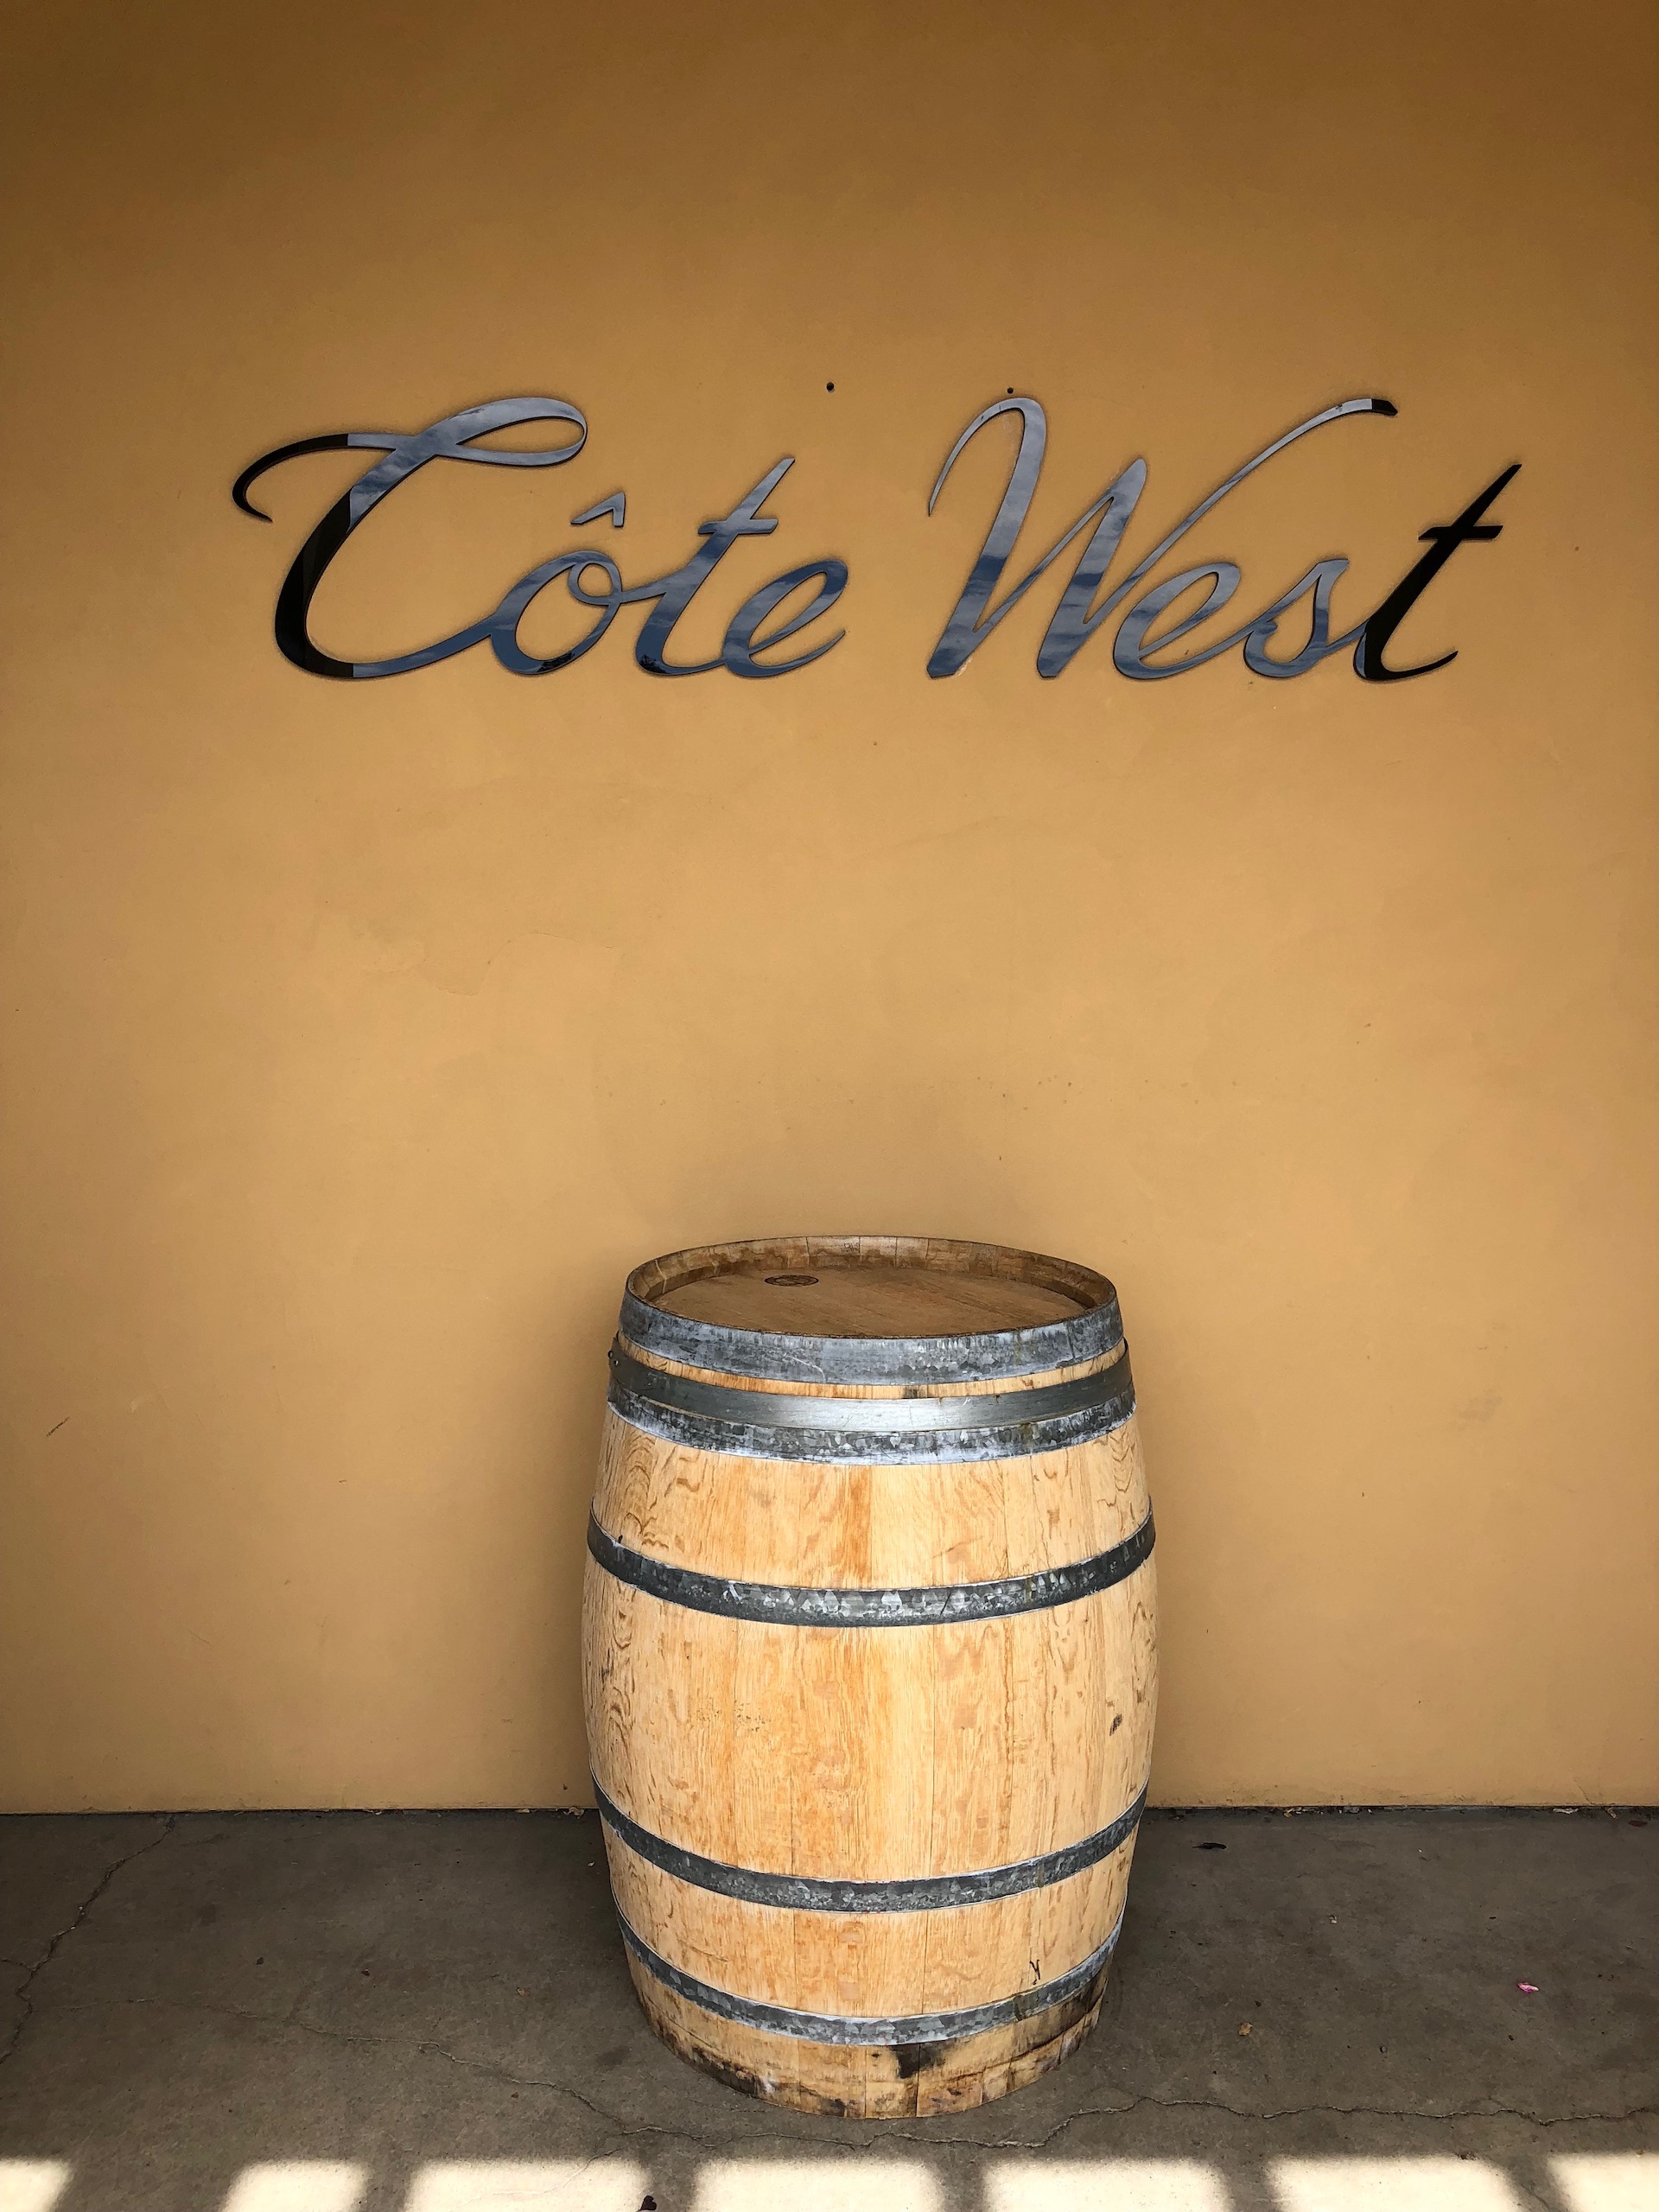 Welcome to Côte West in Oakland’s Embarcadero Cove